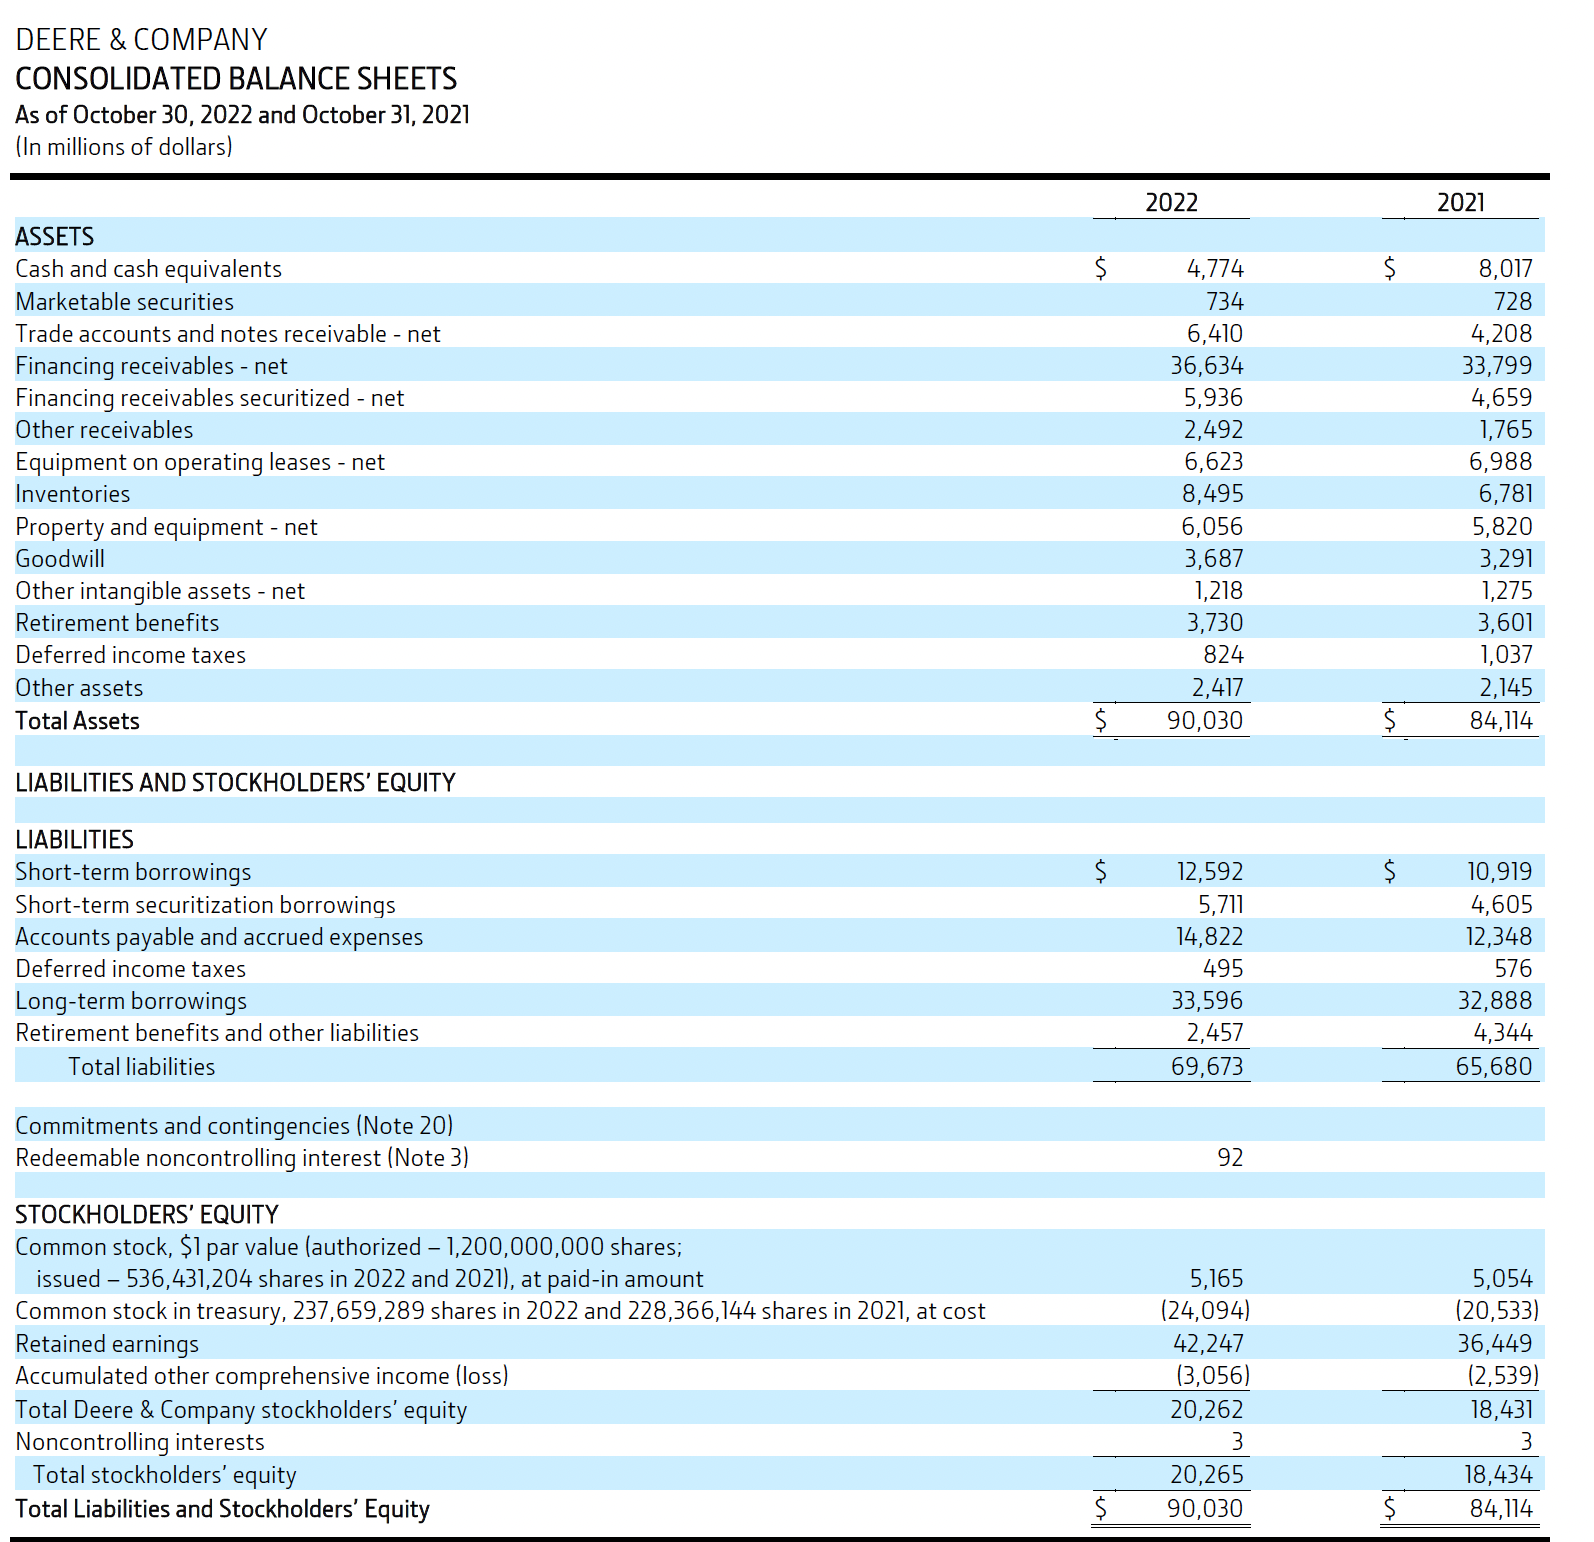 DEERE & COMPANY CONSOLIDATED BALANCE SHEETS As of October 30, 2022 and October 31, 2021 (In millions of